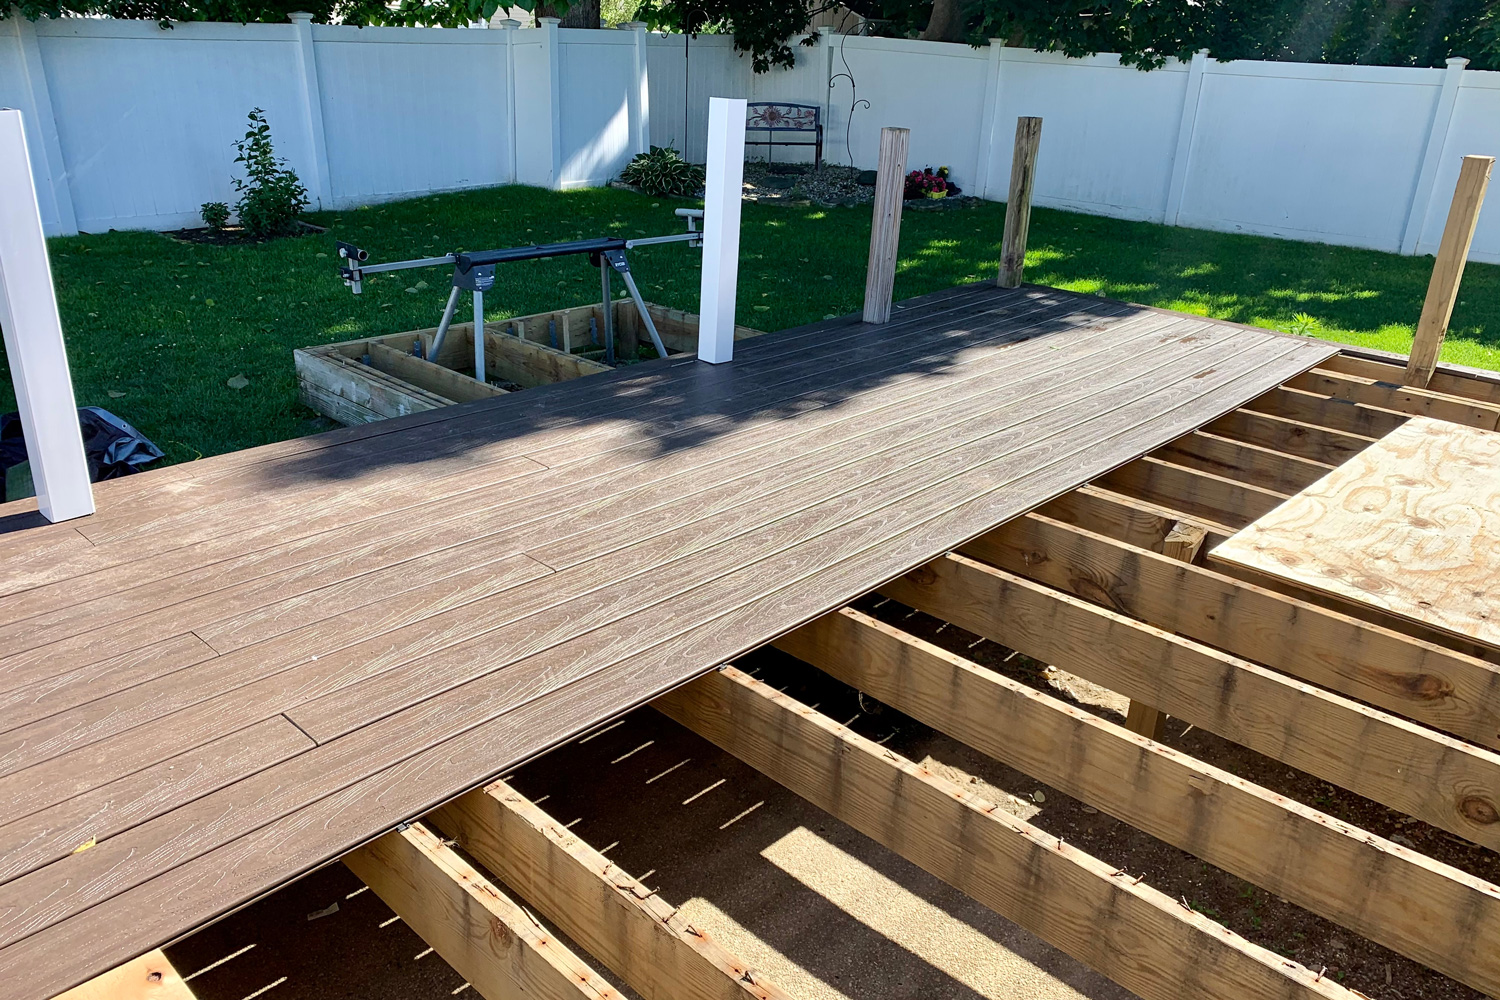 Remodeling a deck in a suburban backyard. The contractor is laying down composite wood , has once PVC railing in place, and there is a giant saw. The tool is sitting in the demolished deck.